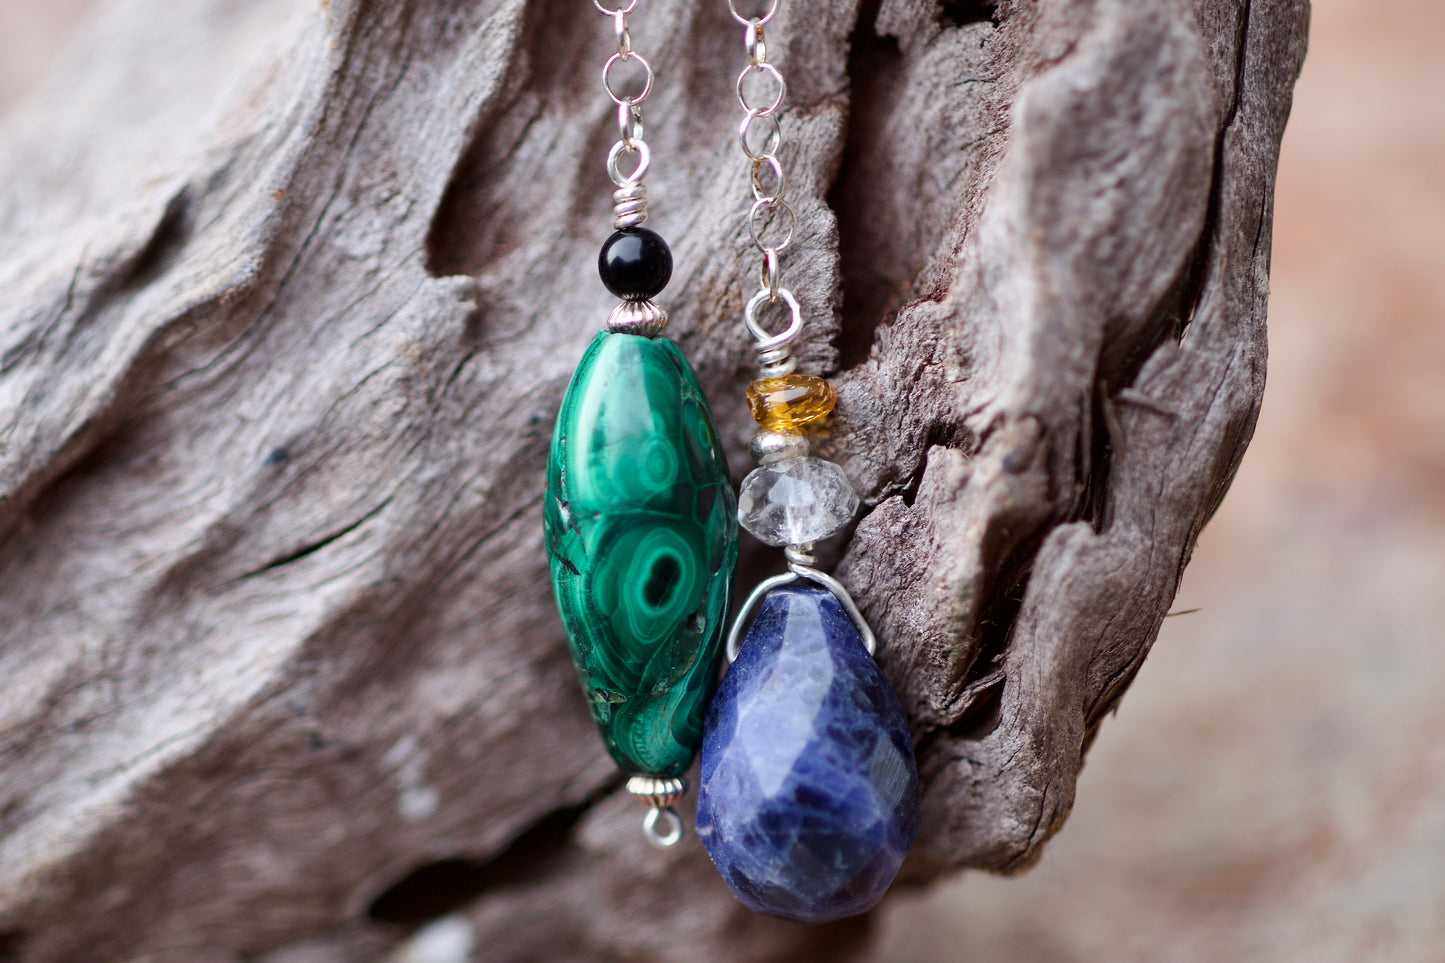 Amber, Clear Quartz, Sodalite, Obsidian, Malachite, and Sterling Silver Double-sided Pendulum